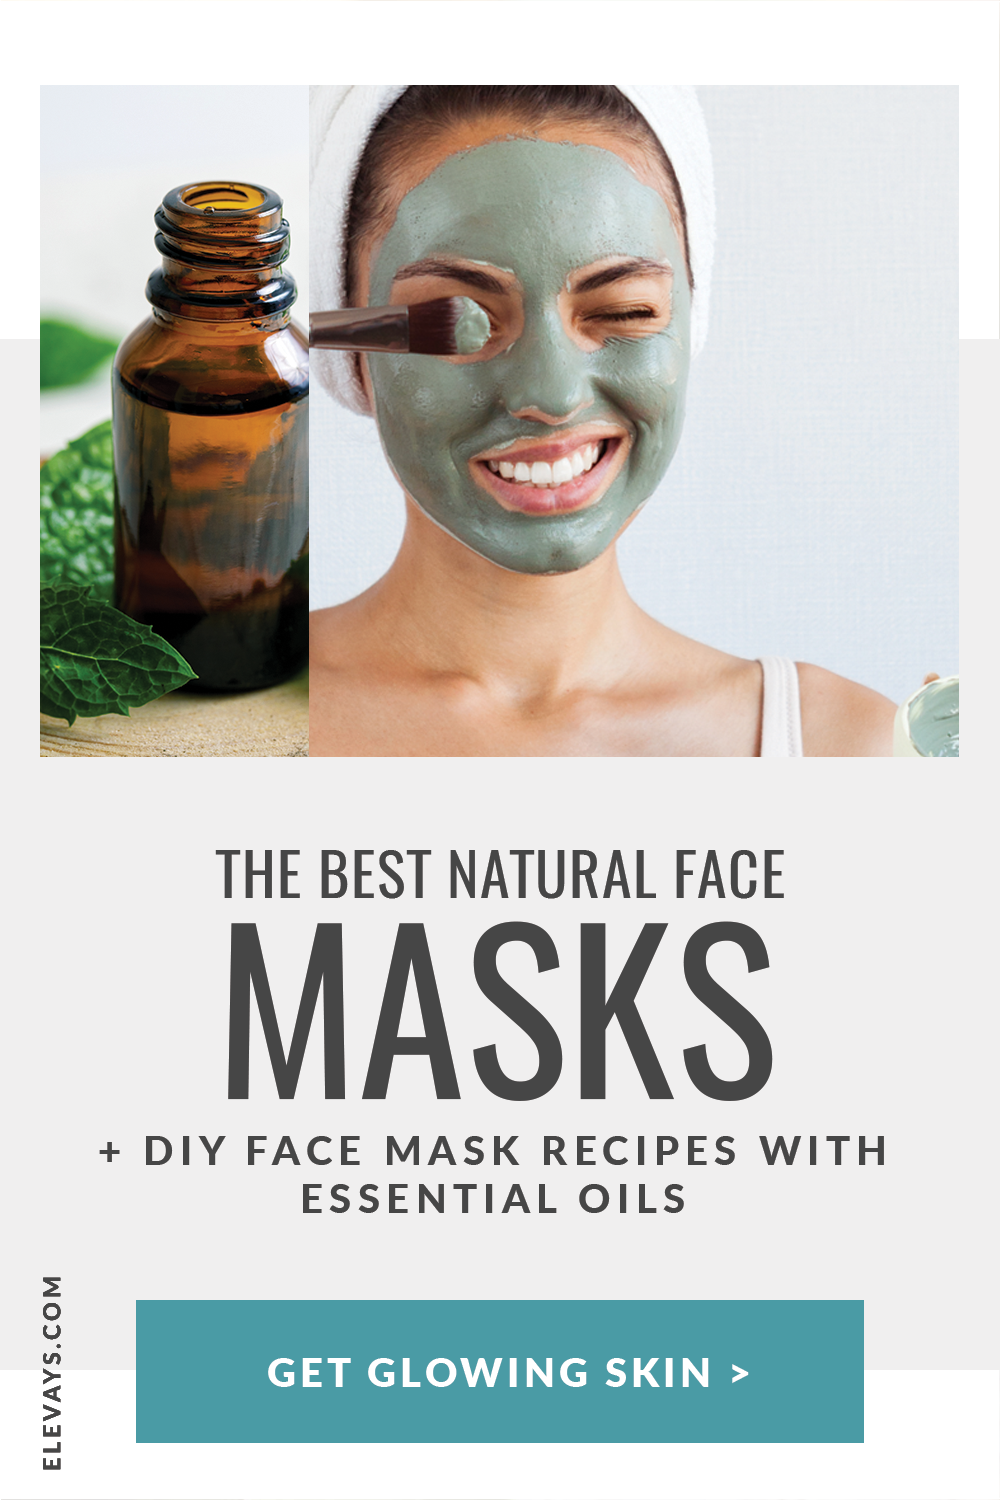 The Best Natural Face Masks + DIY Recipes with Essential Oils